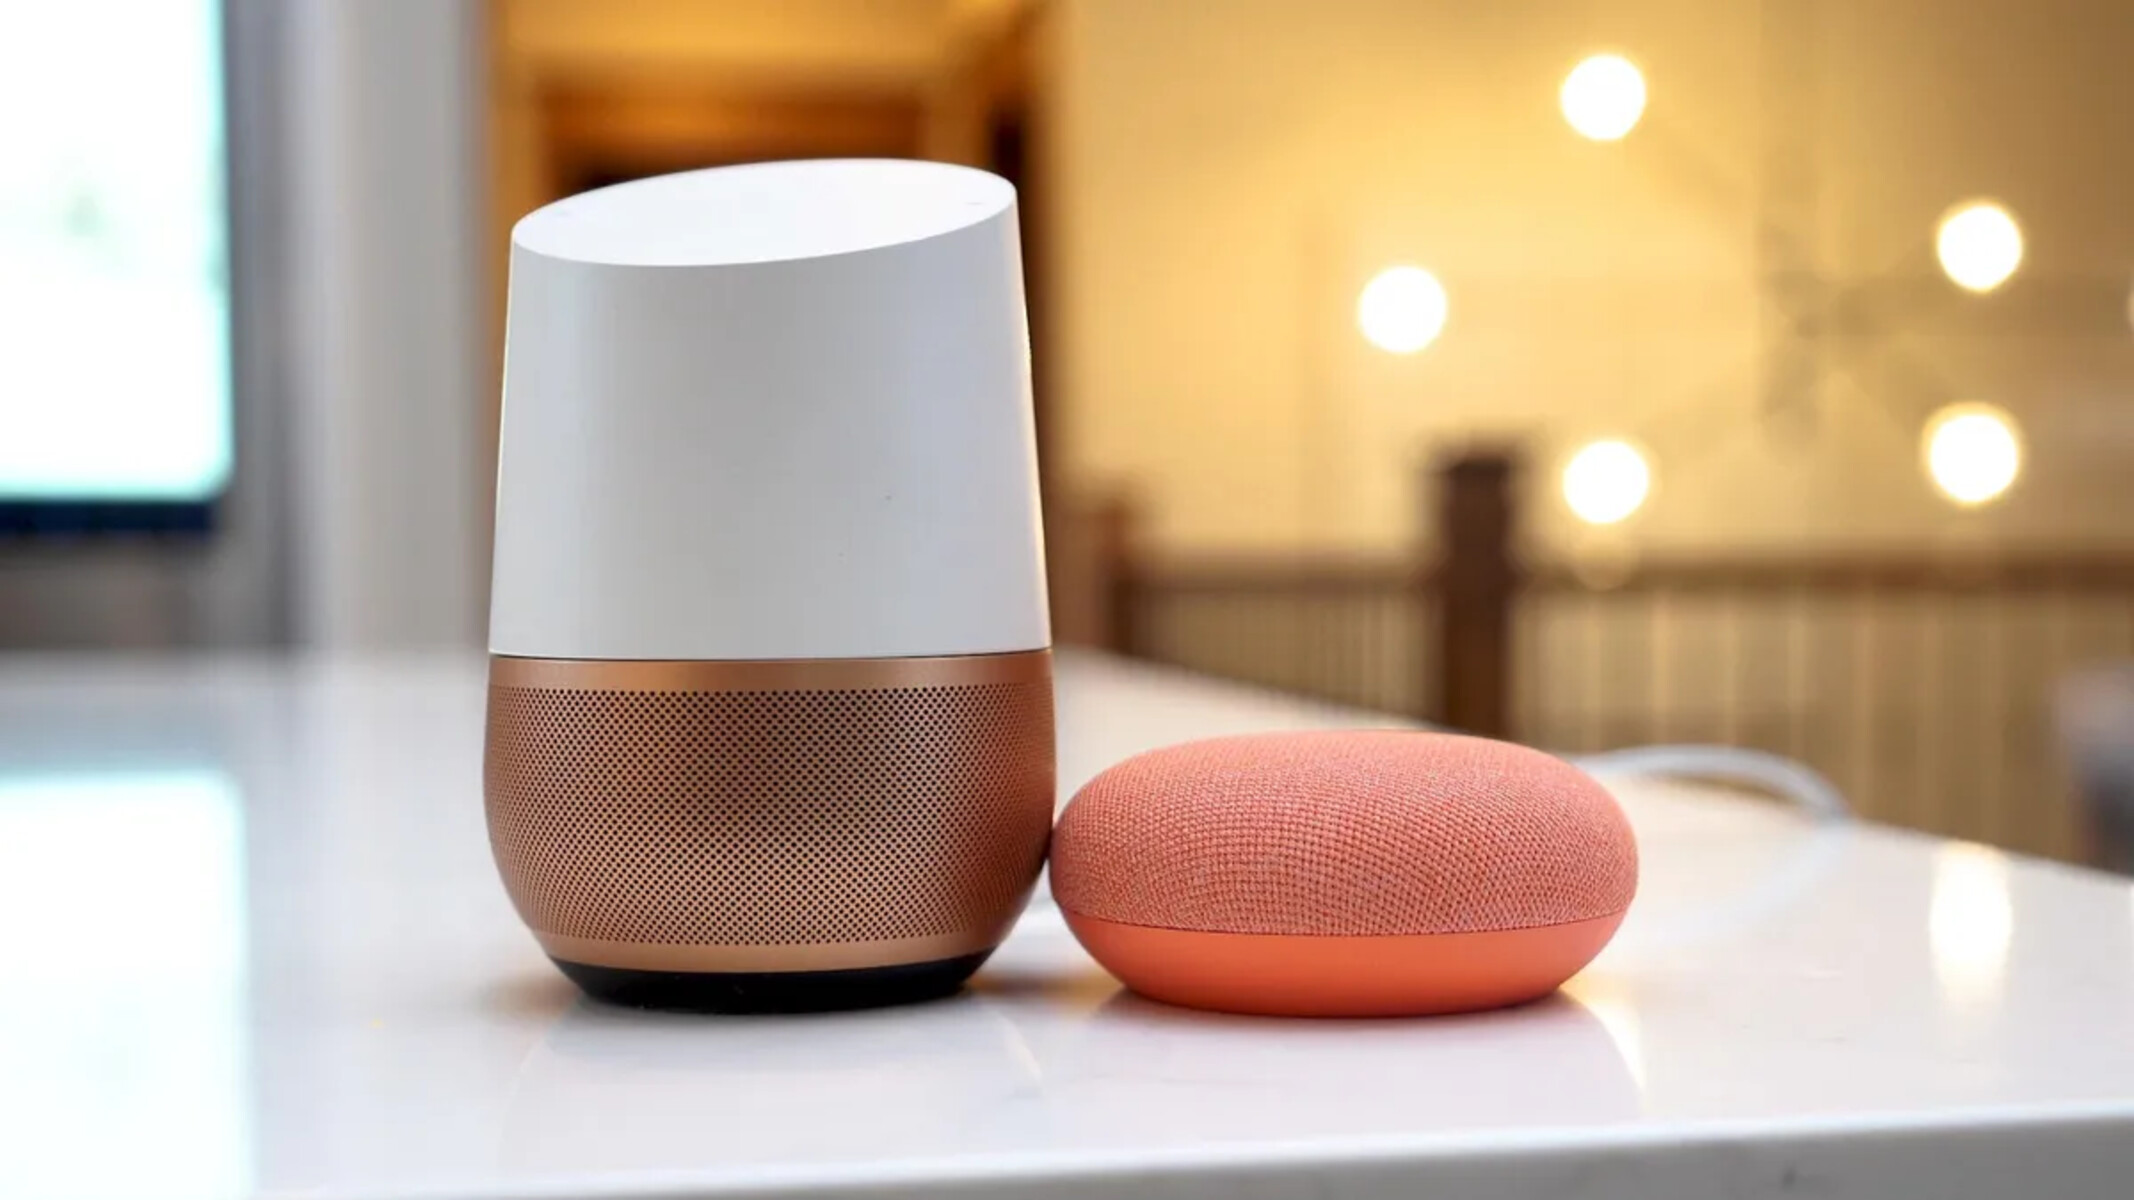 How To Stop Google From Responding On My Phone When Using A Smart Speaker